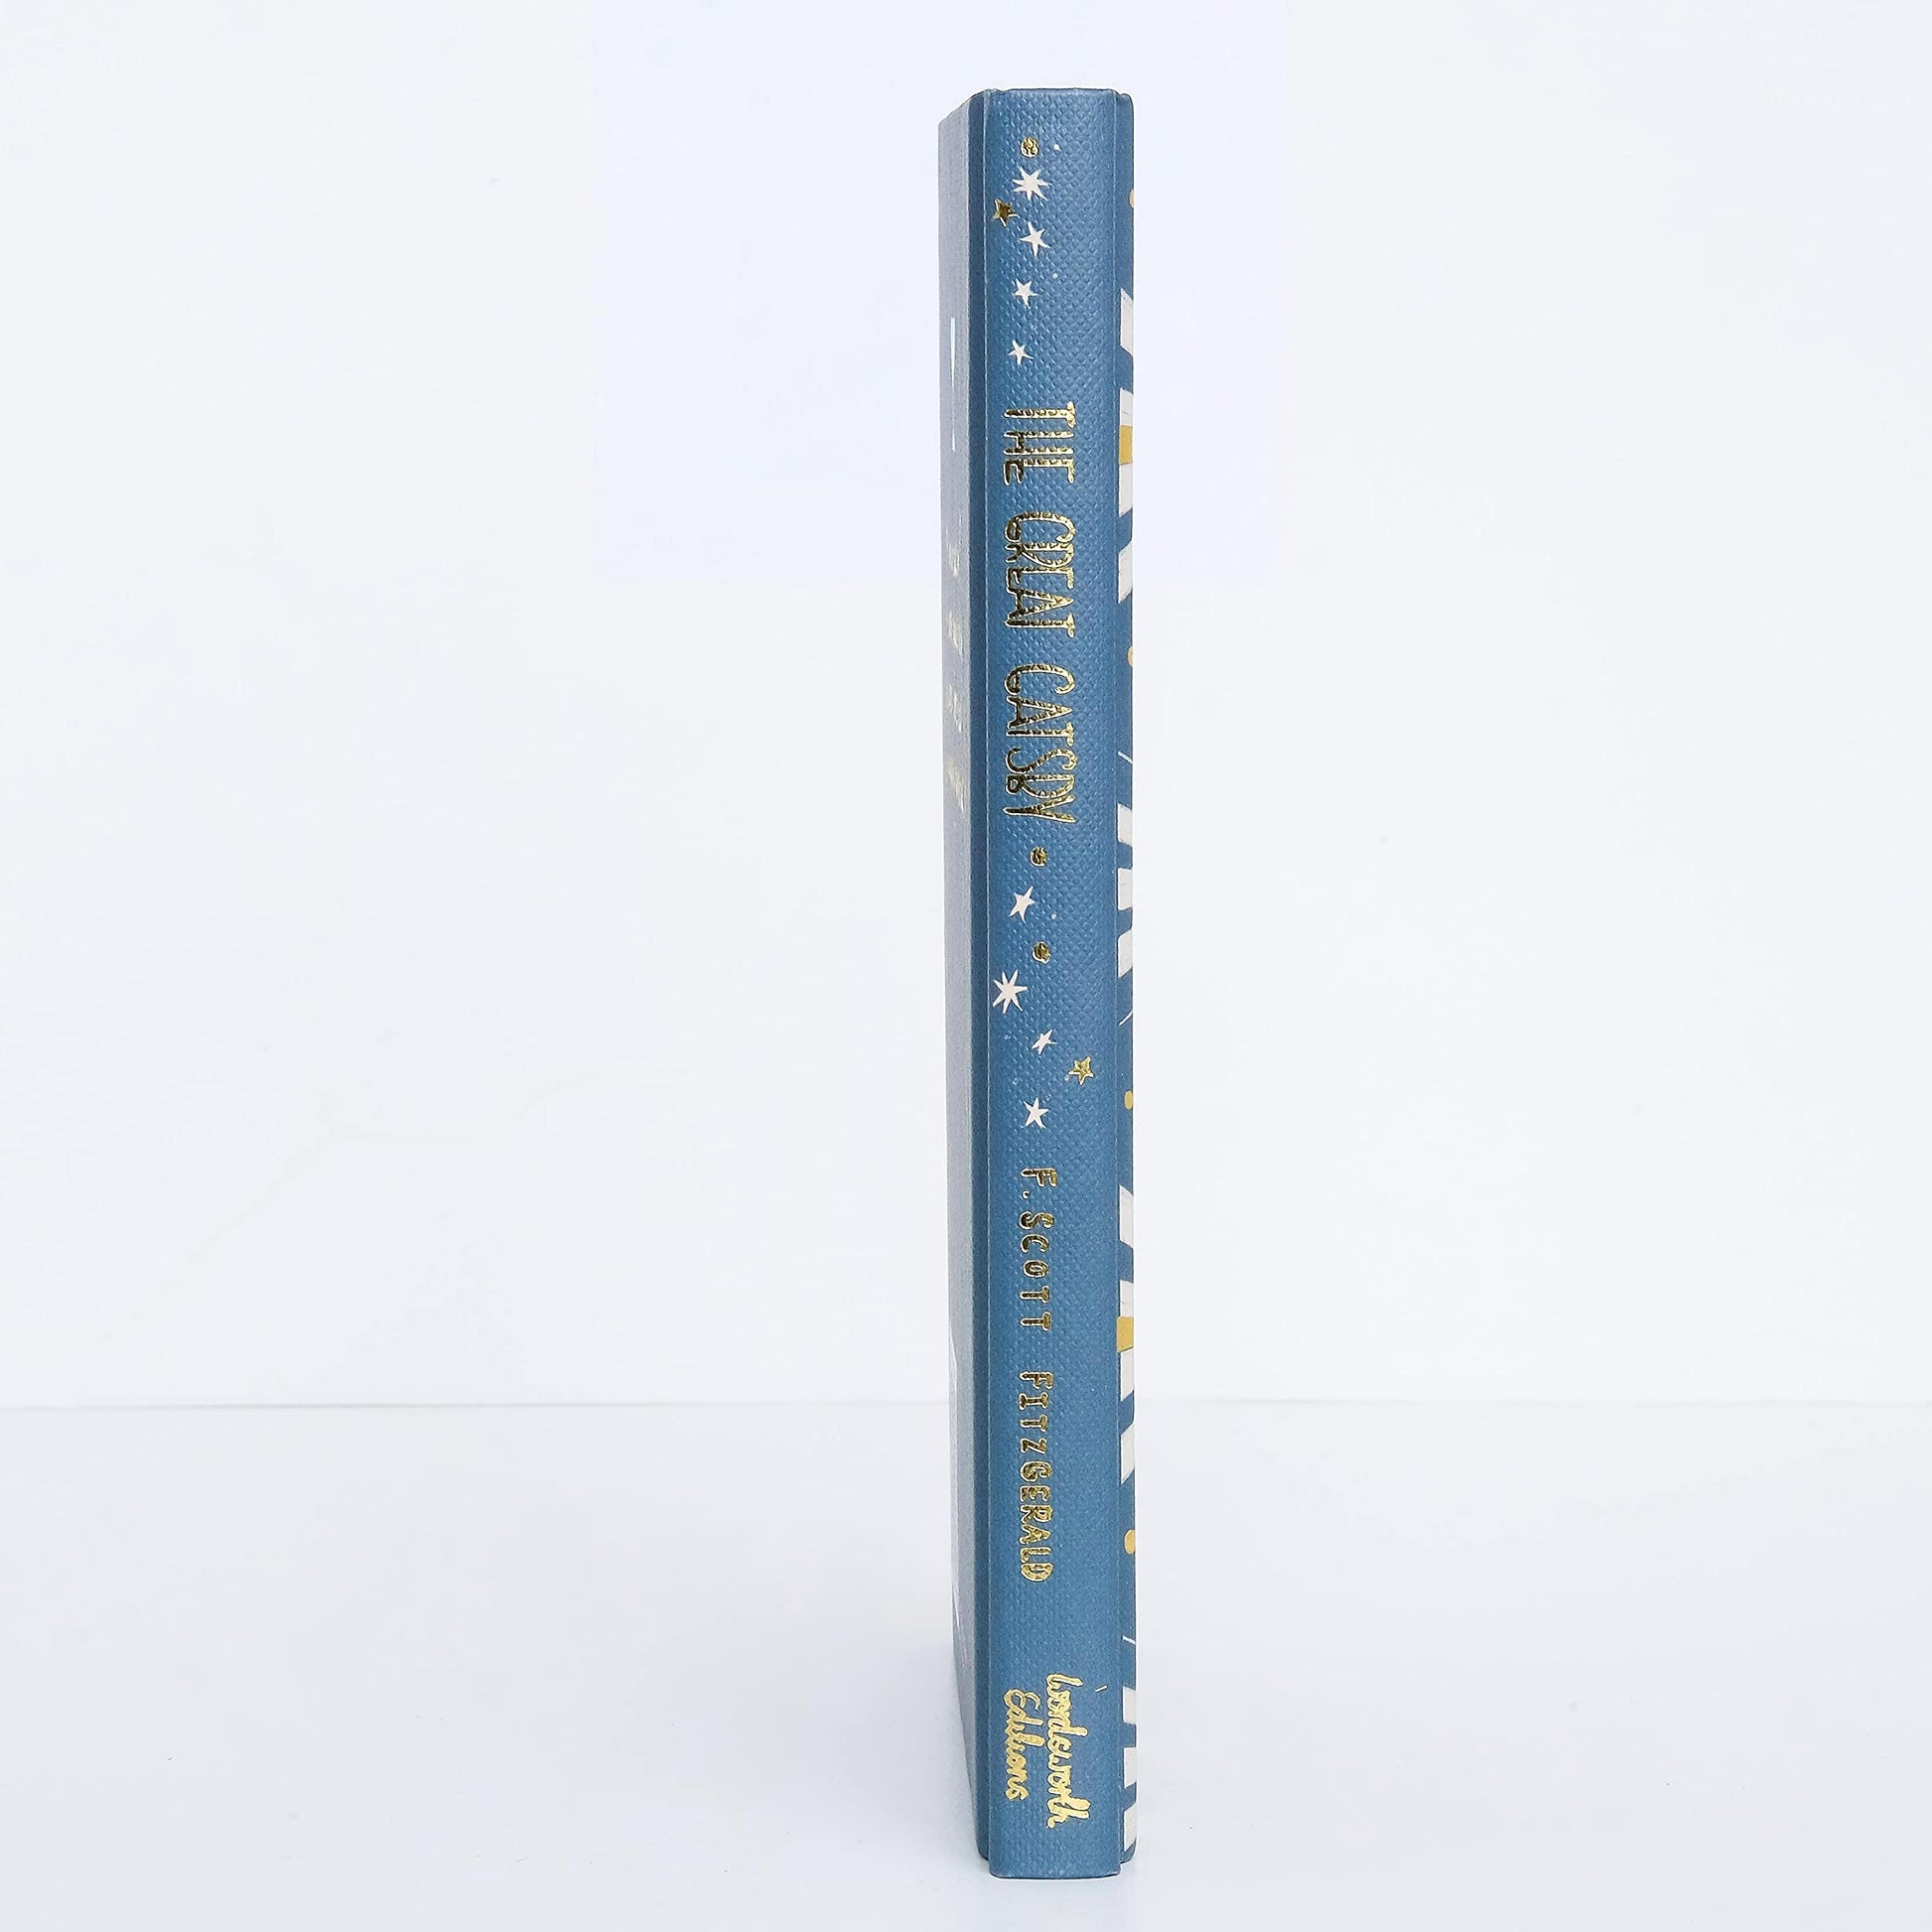 The Great Gatsby by F.Scott Fitzgerald - Wordsworth Collector's Edition